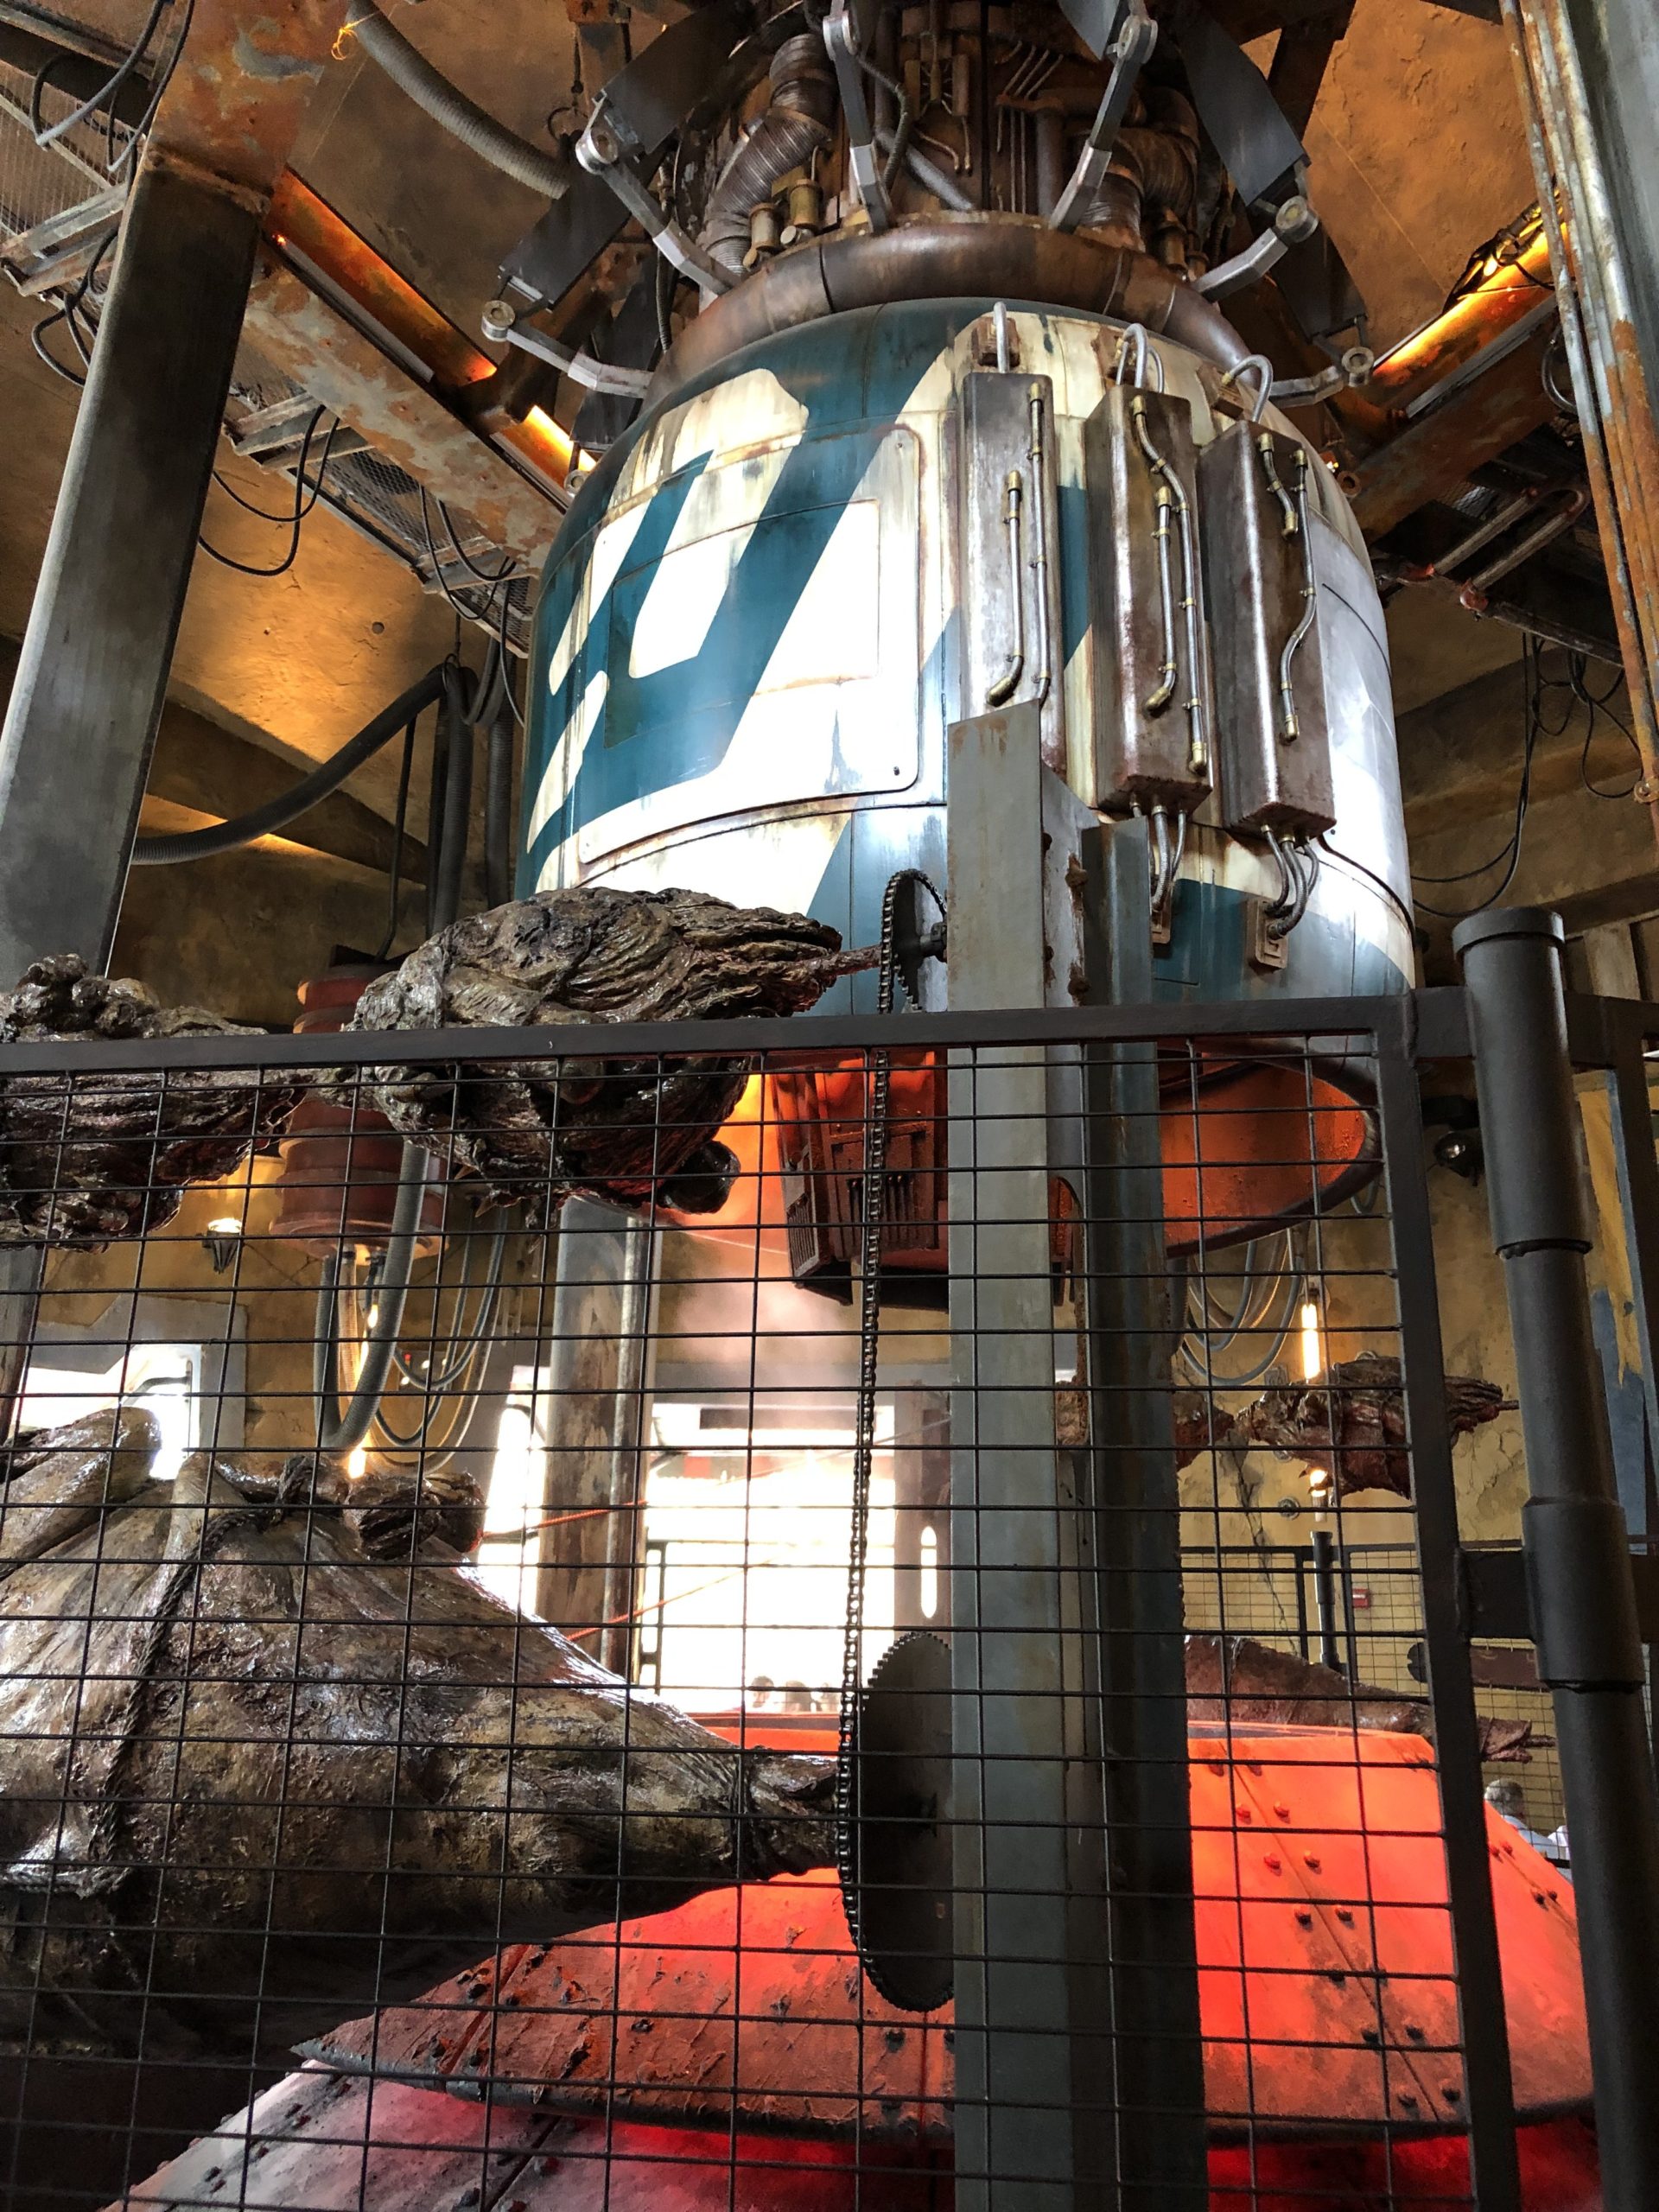 The podracer engine that roasts the meat at Ronto Roasters